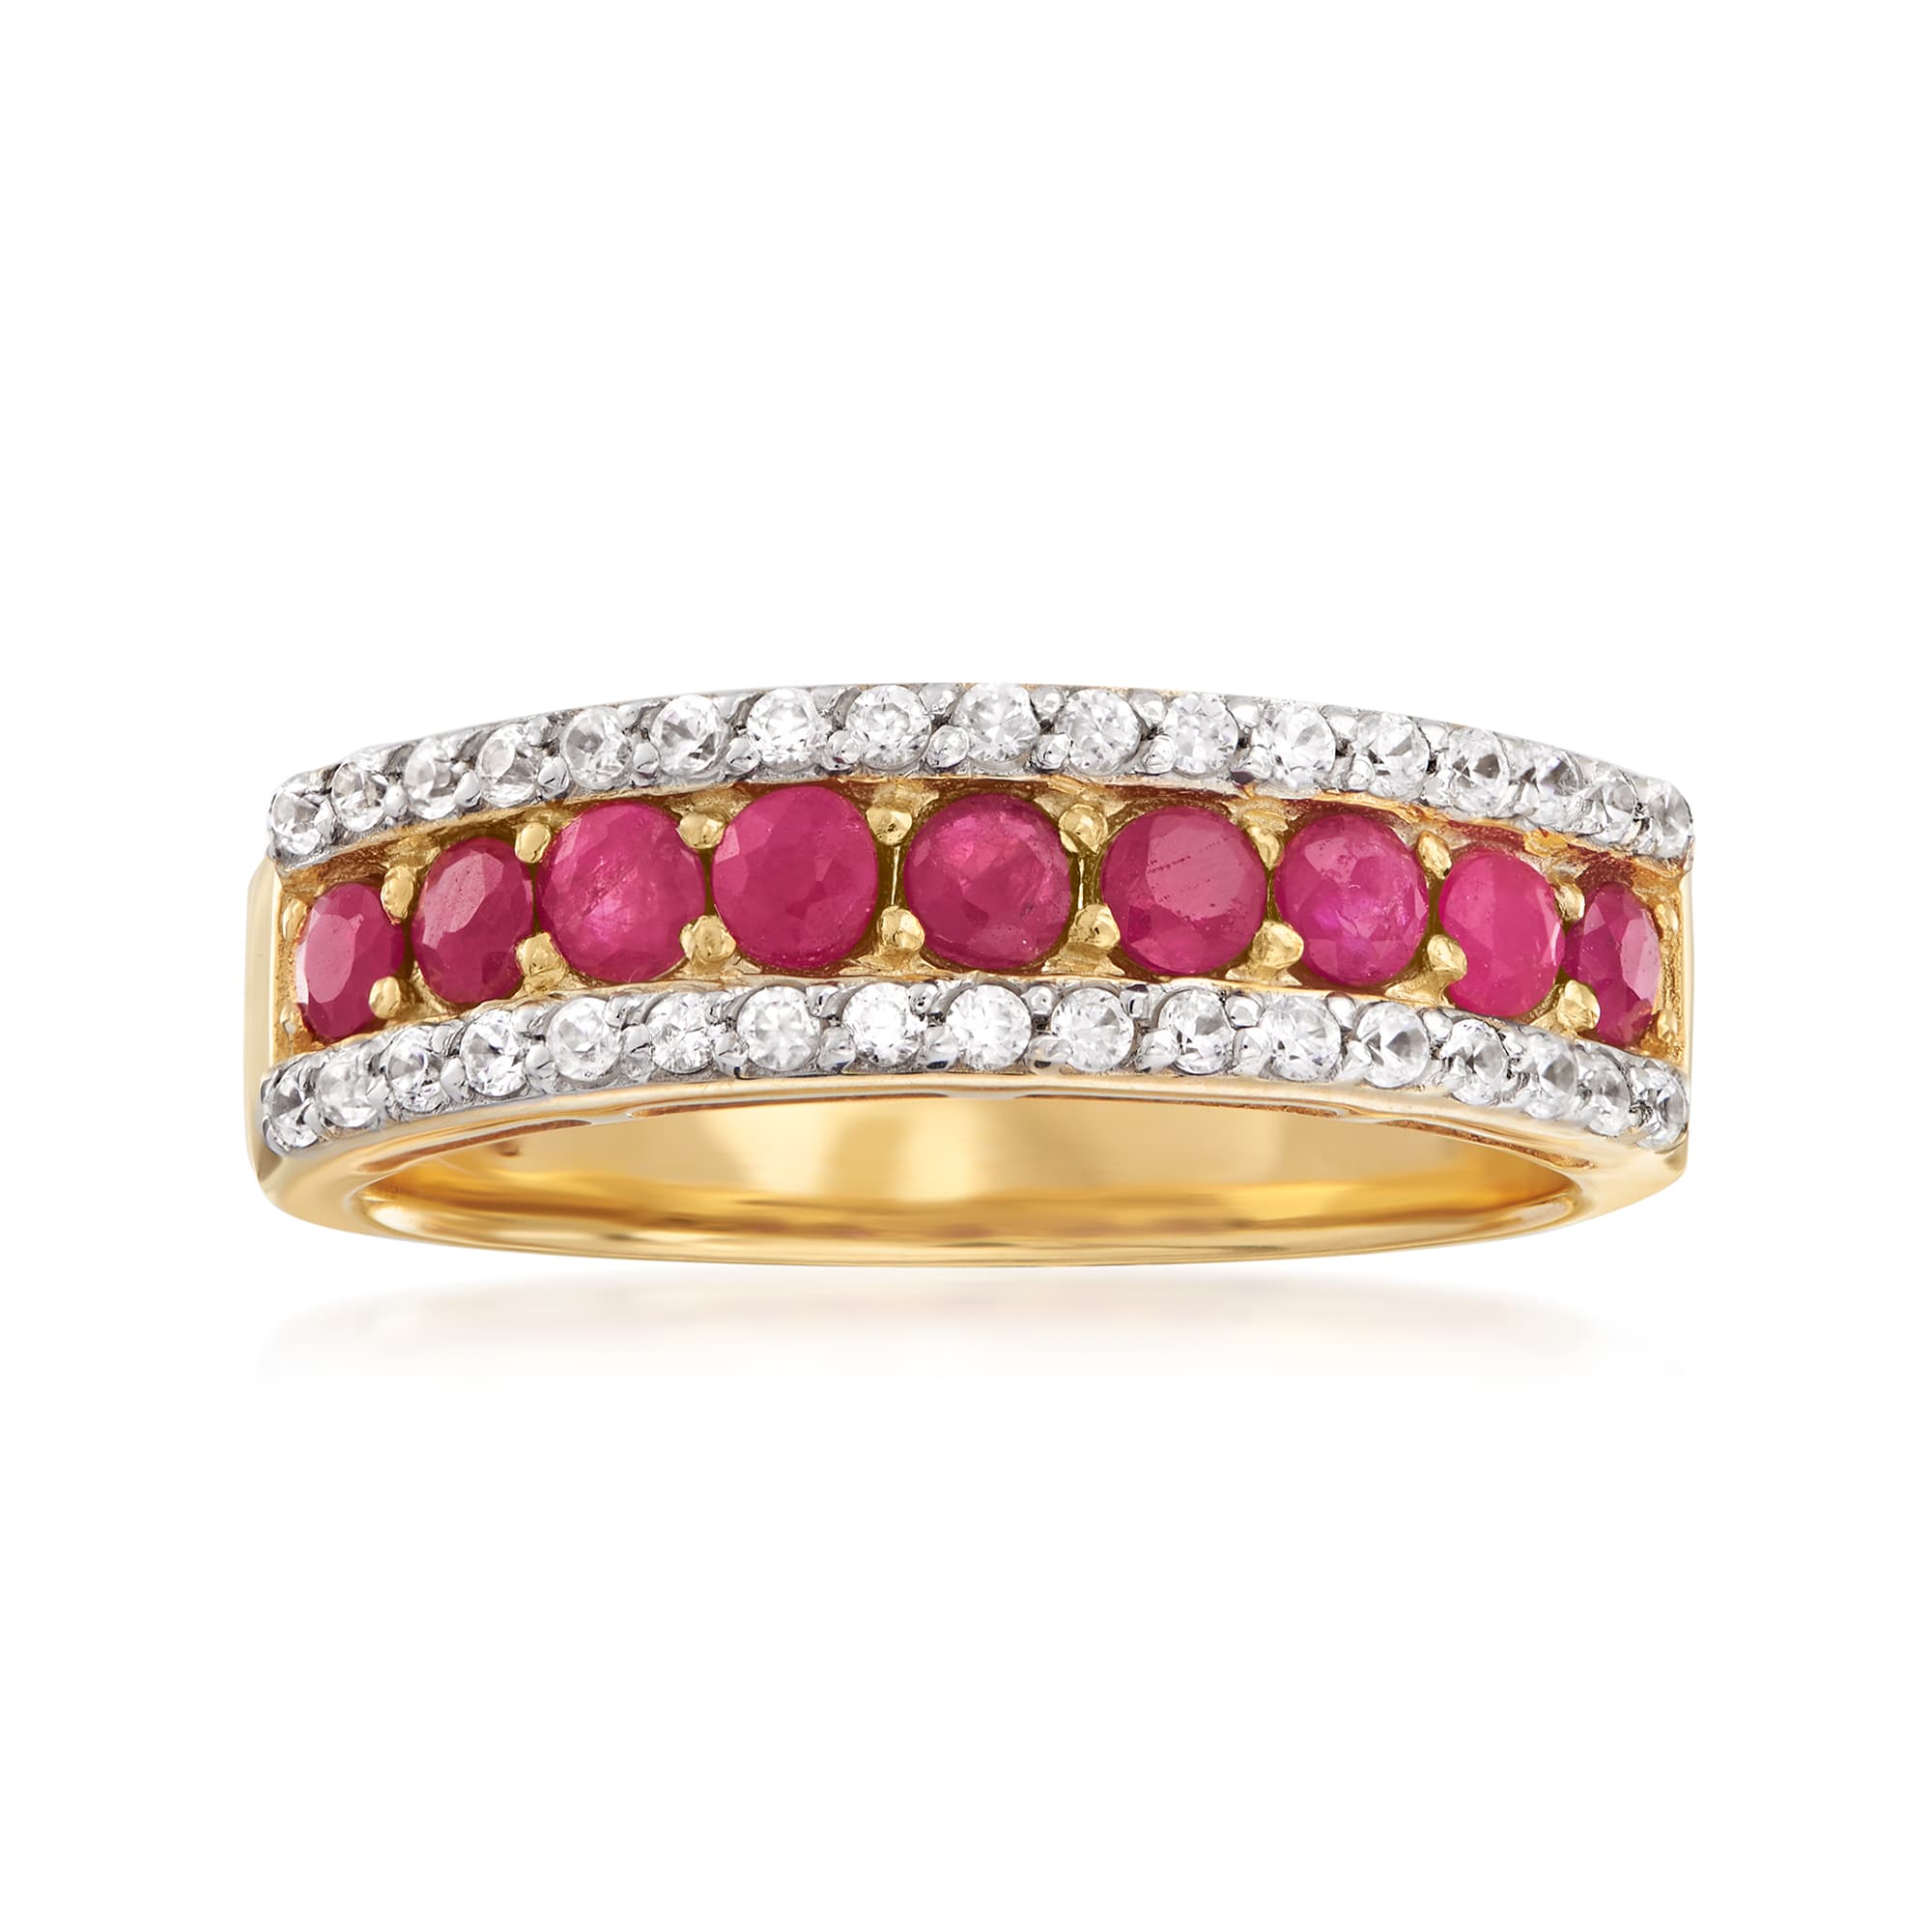 1.30 ct. t.w. Ruby and .30 ct. t.w. White Zircon Ring in 18kt Gold Over ...